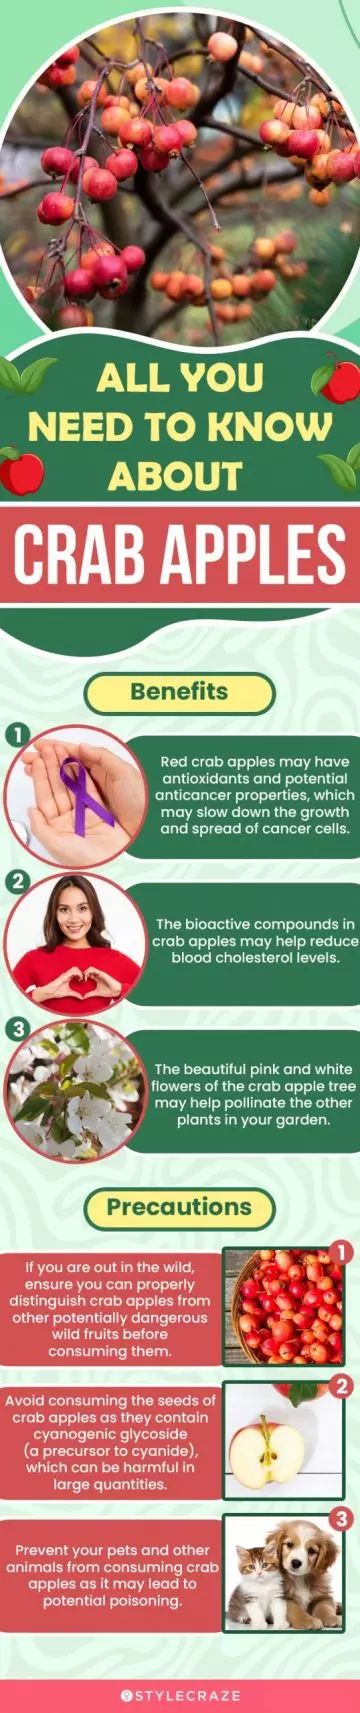 all you need to know about crab apples (infographic)